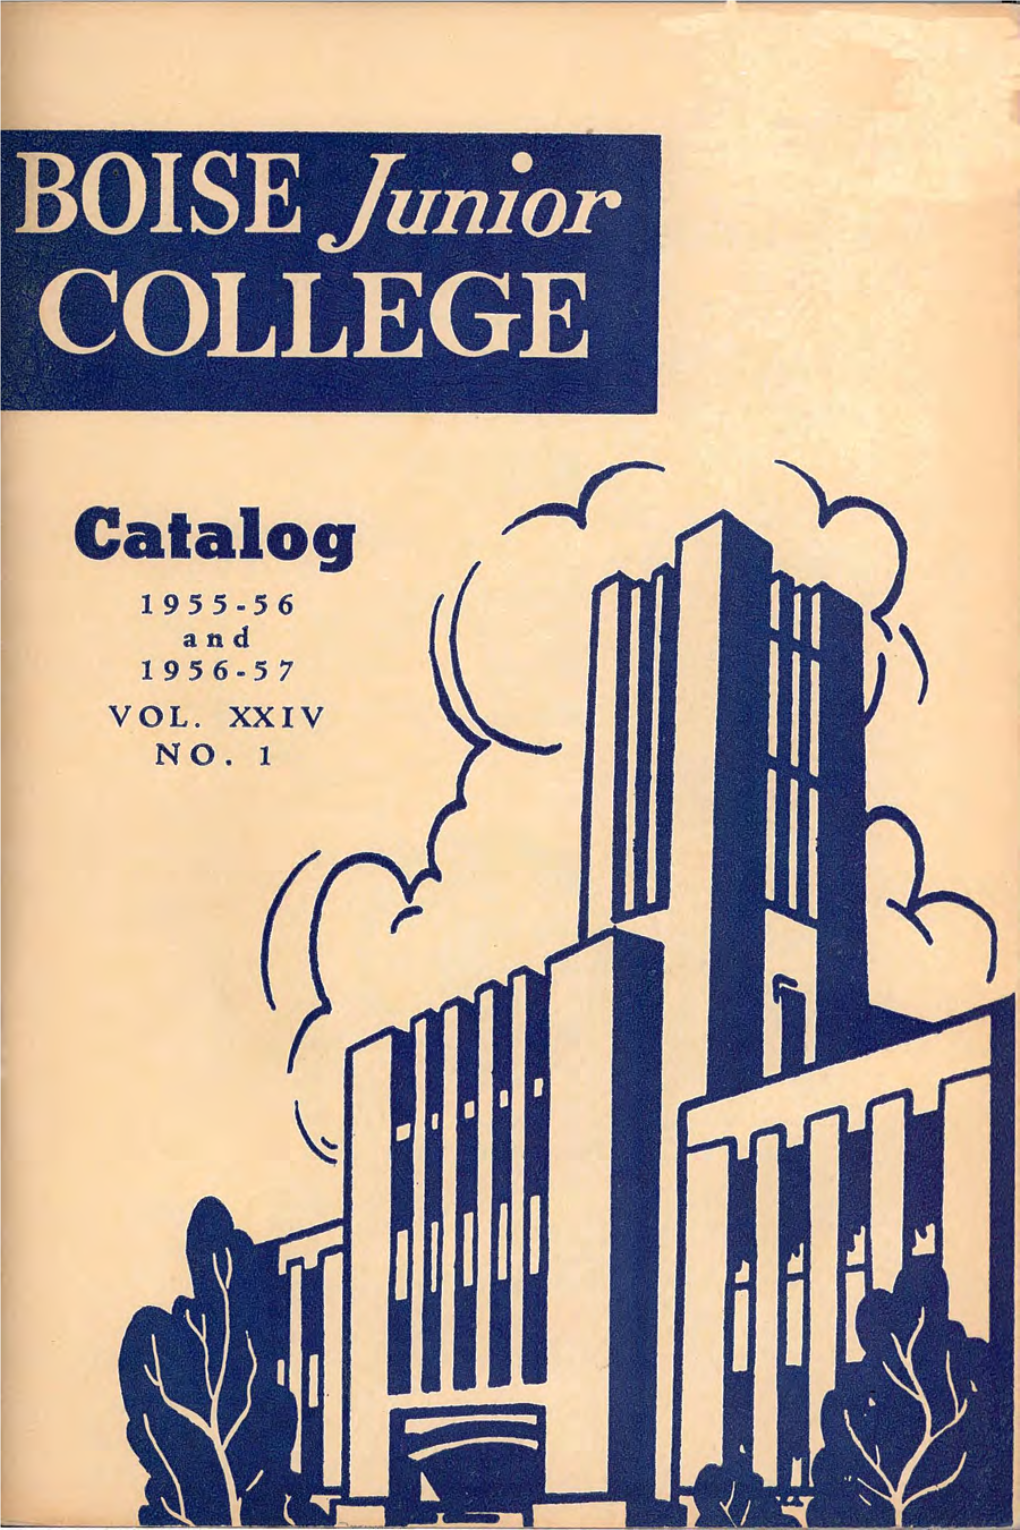 CATALOG 1955 - 1956 and 1956 - 1957